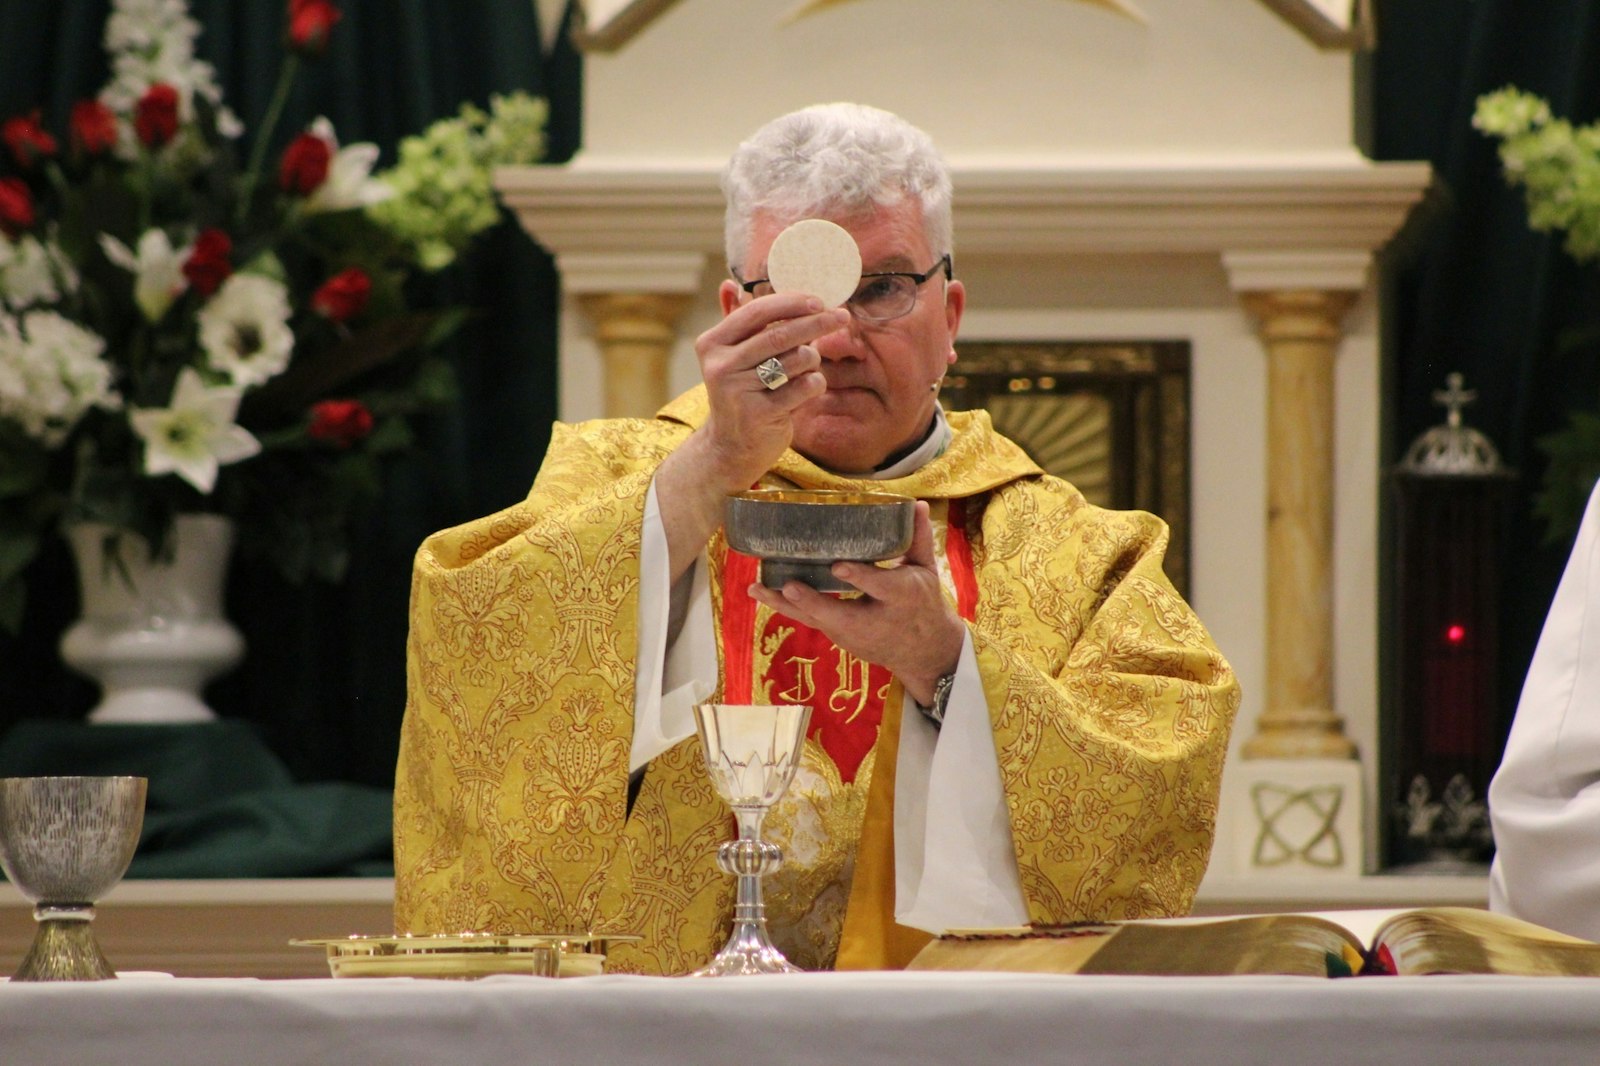 Bishop Monforton elevates the Eucharist during a Mass celebrated at St. Bernard Parish in Beverly, Ohio, during a Eucharistic Day of Revival.